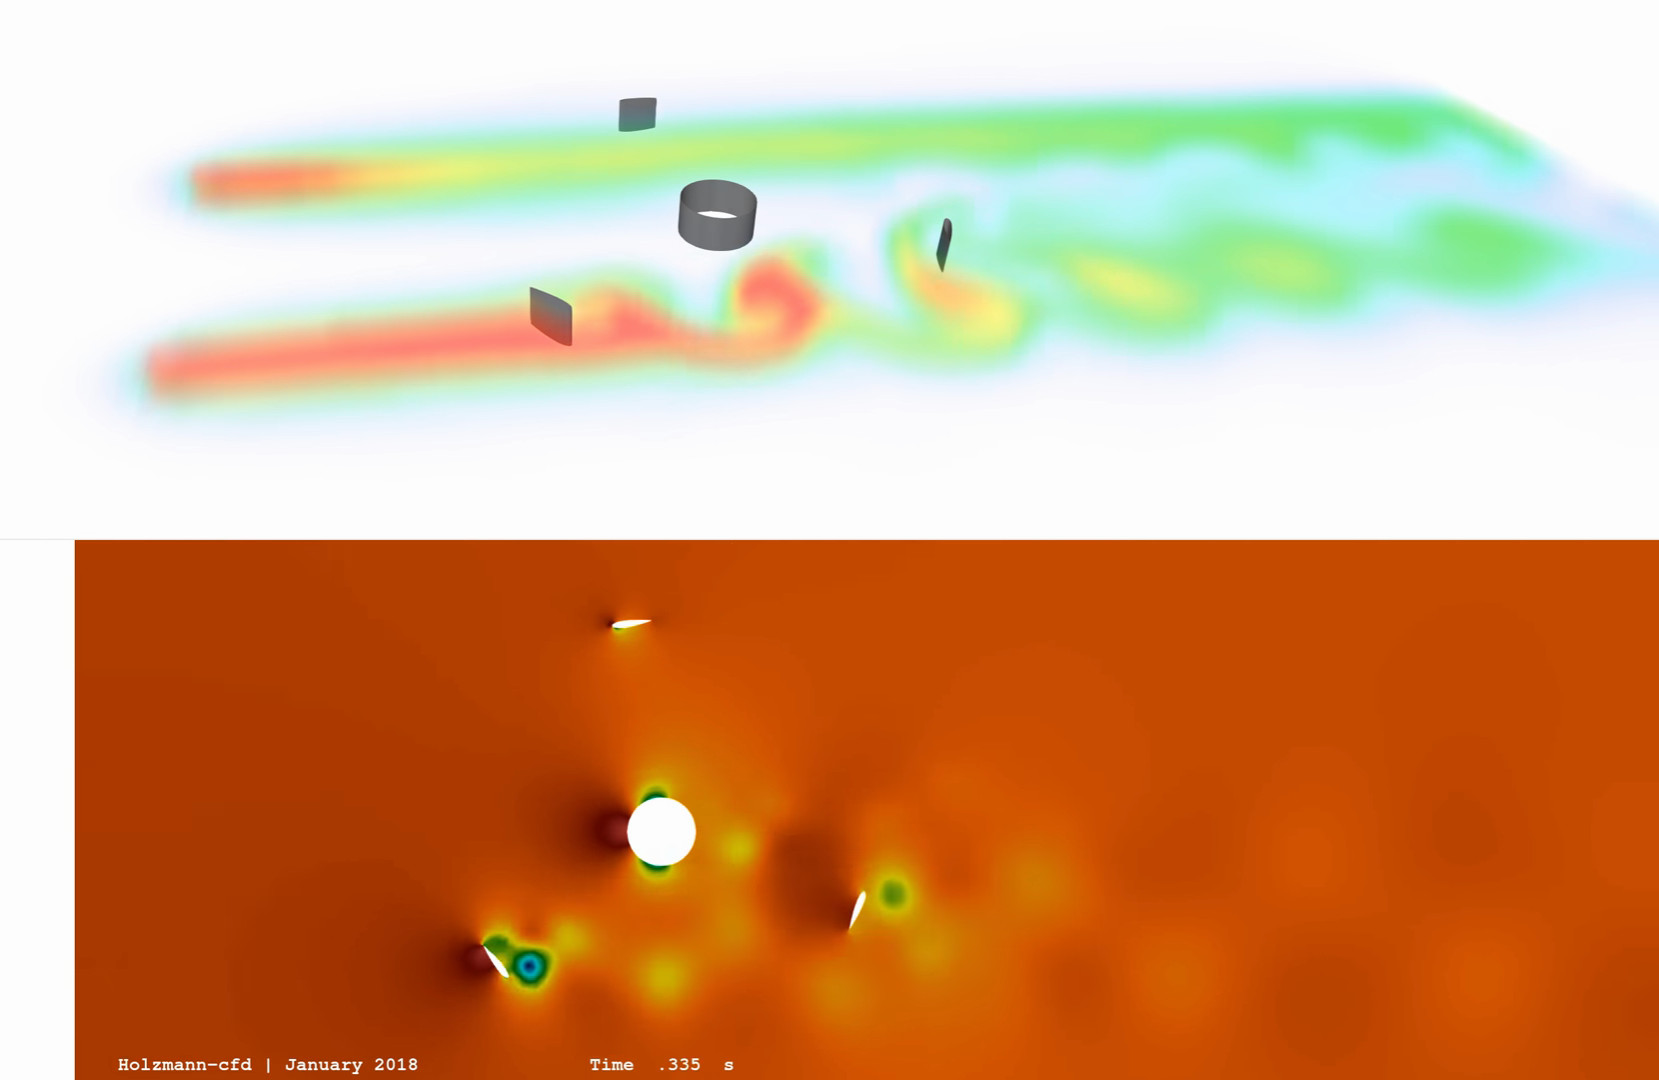 Image: CFD analysis of the VAWT